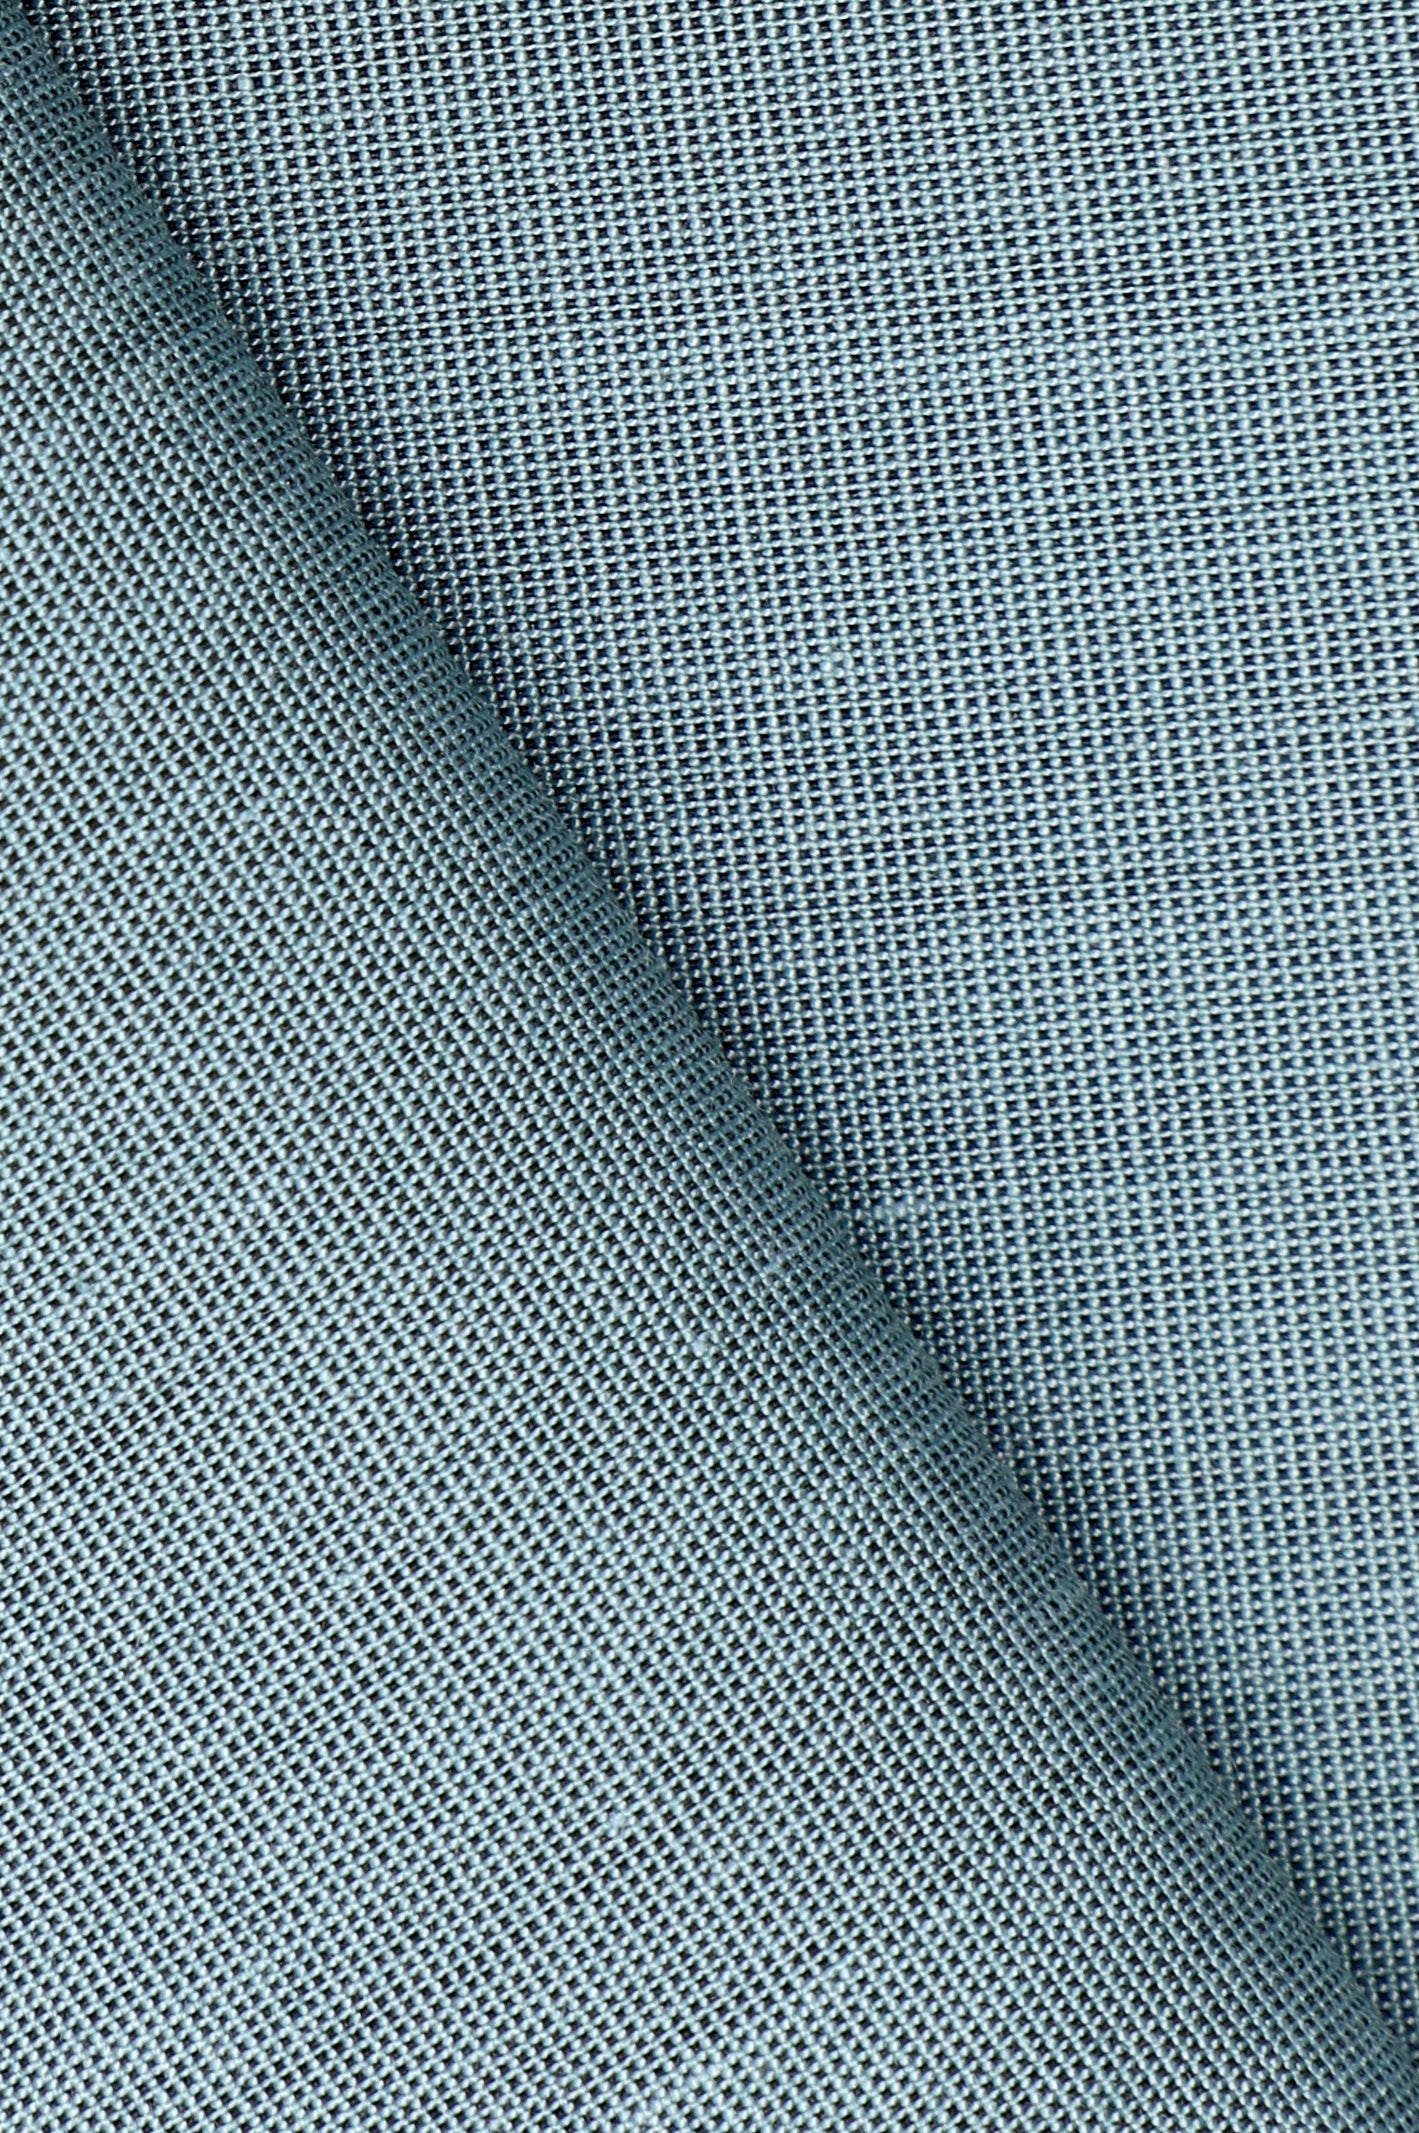 Unstitched Fabric for Men SKU: US0181-L-GREEN - Diners